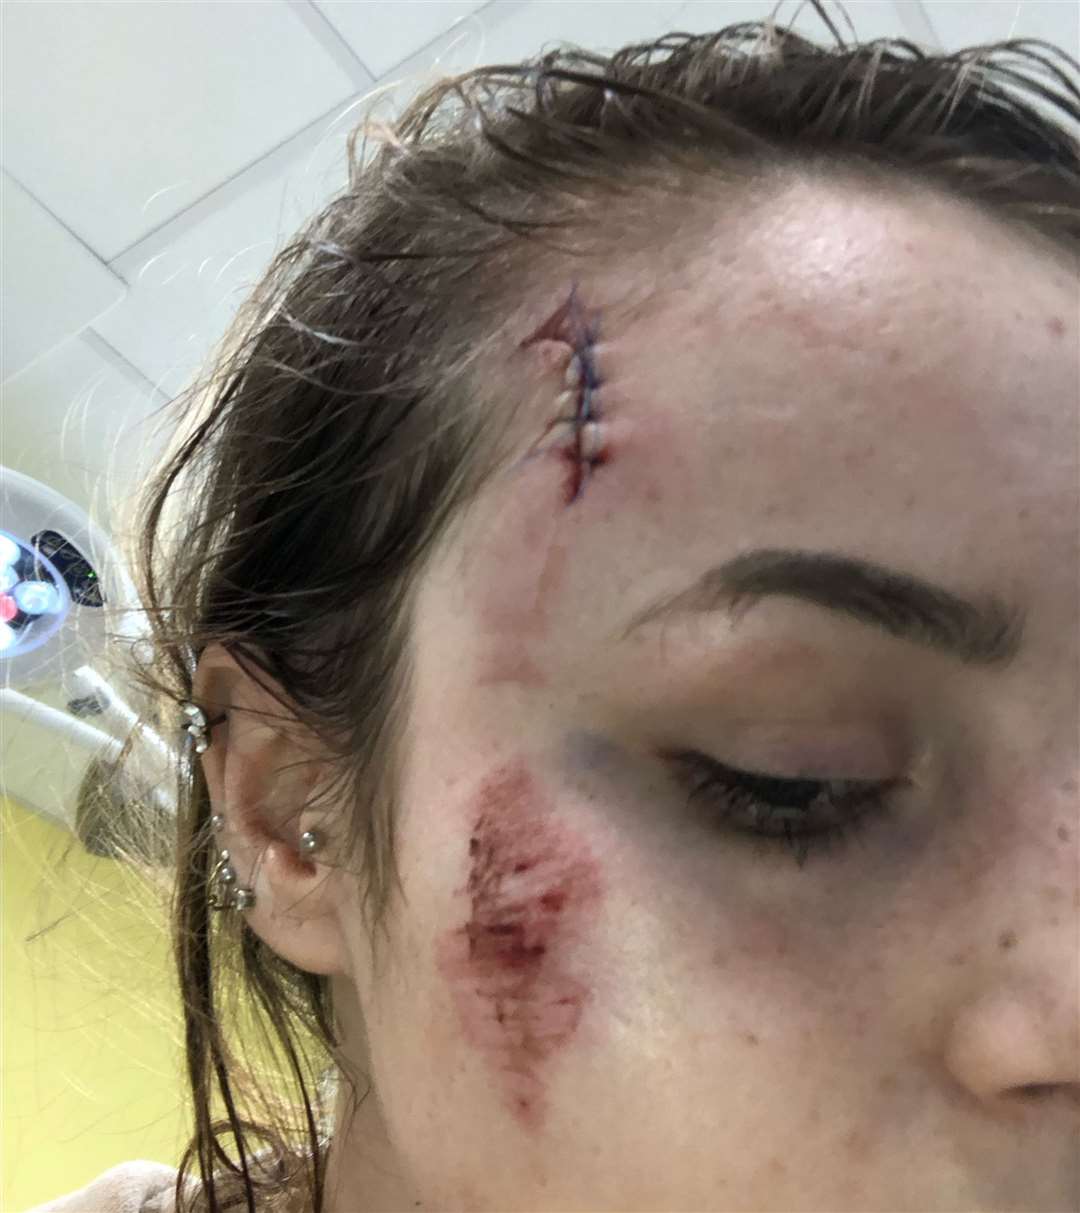 Eliza Eastland, 21, was left with stitches in a head wound